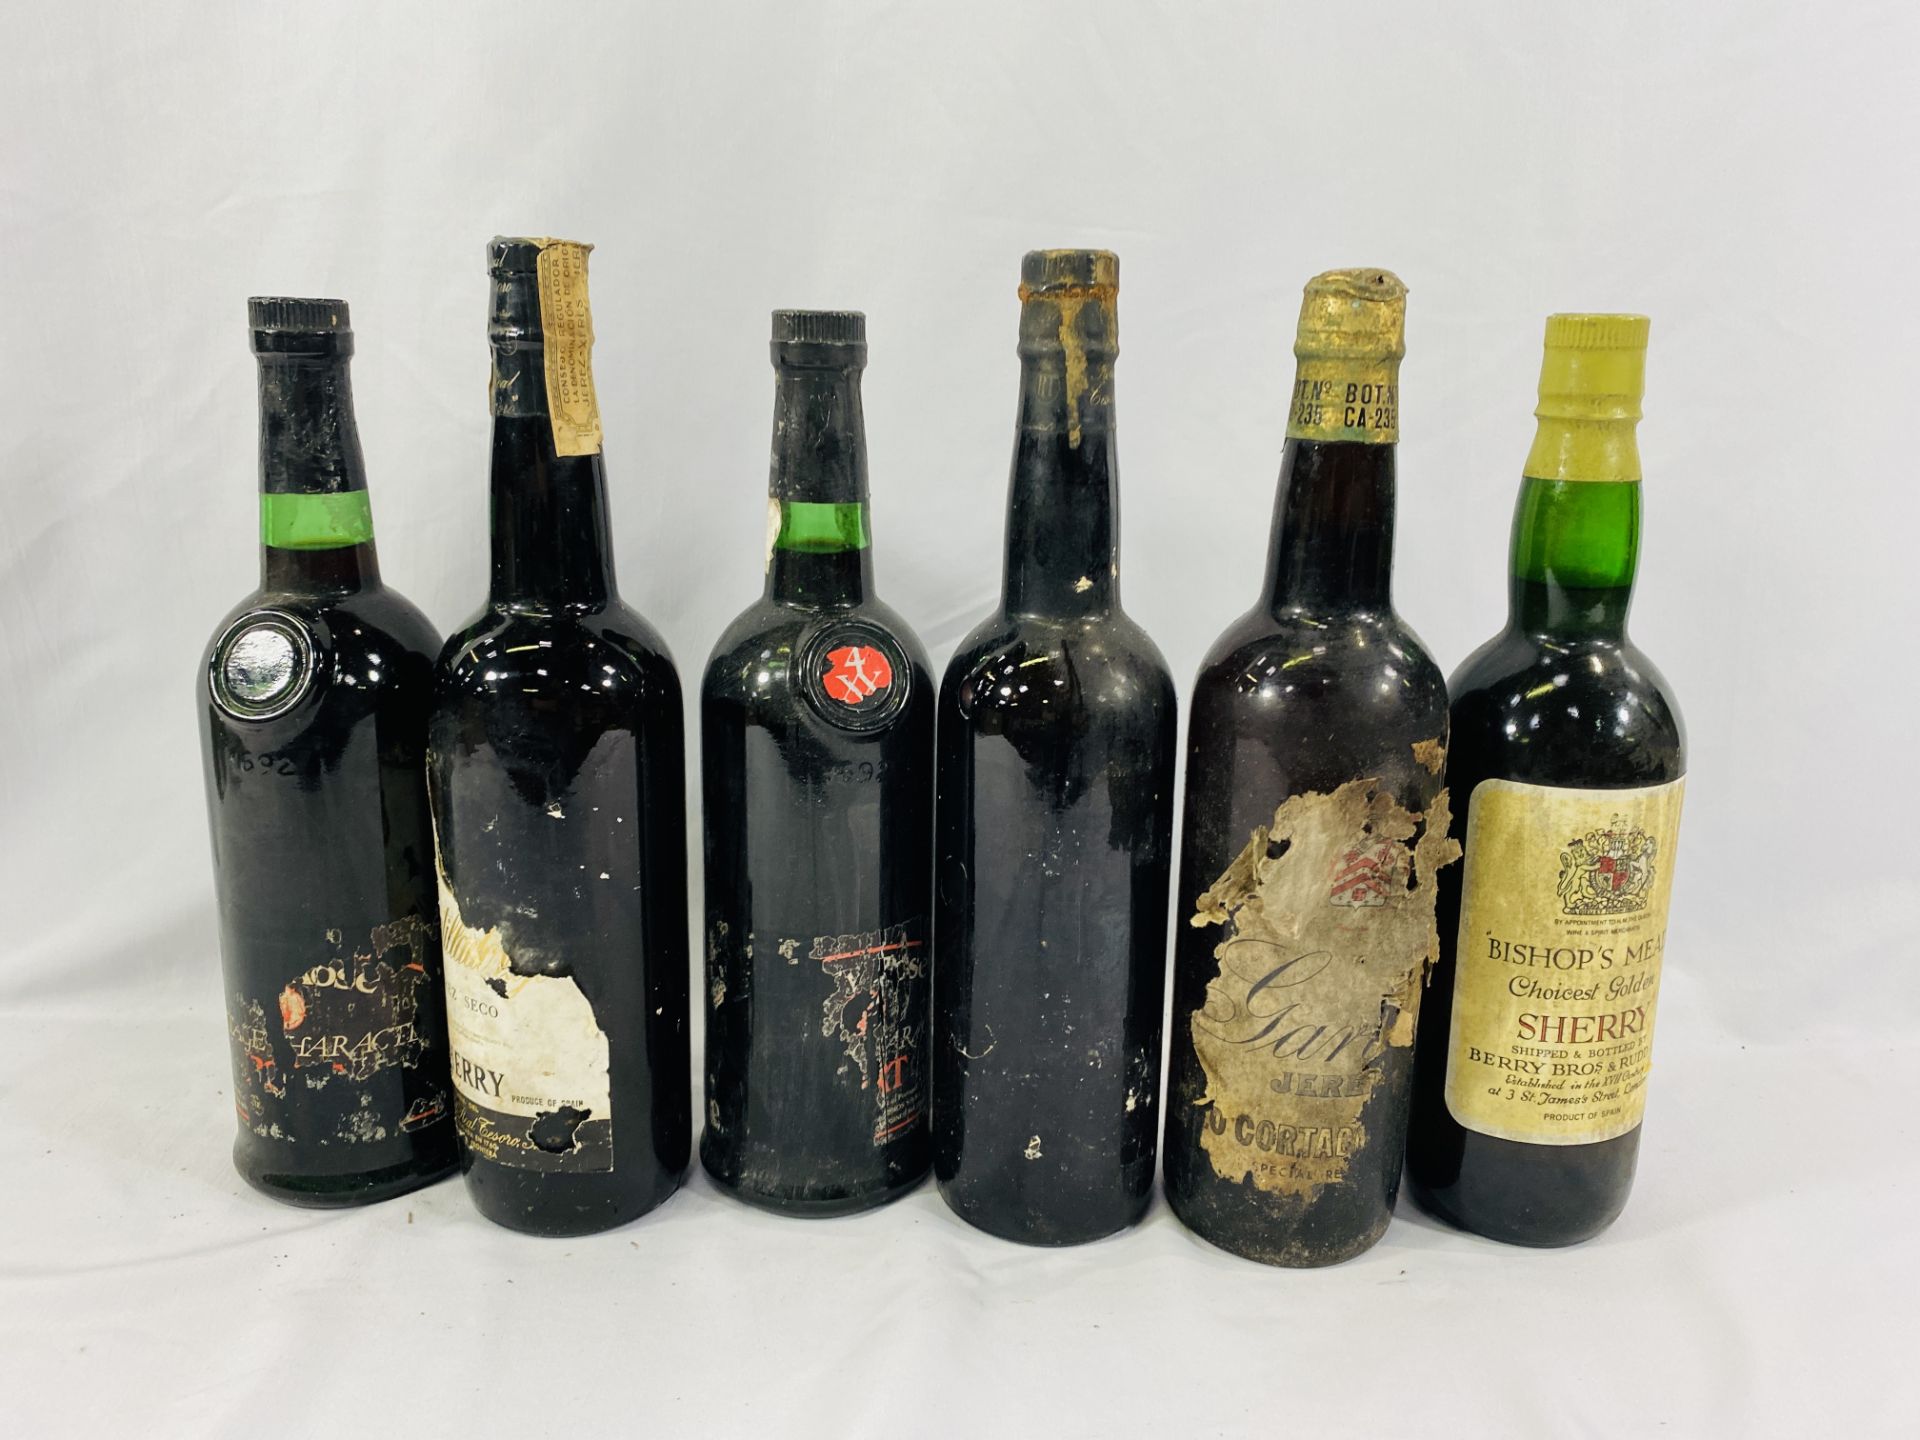 Three bottles of sherry and three of port